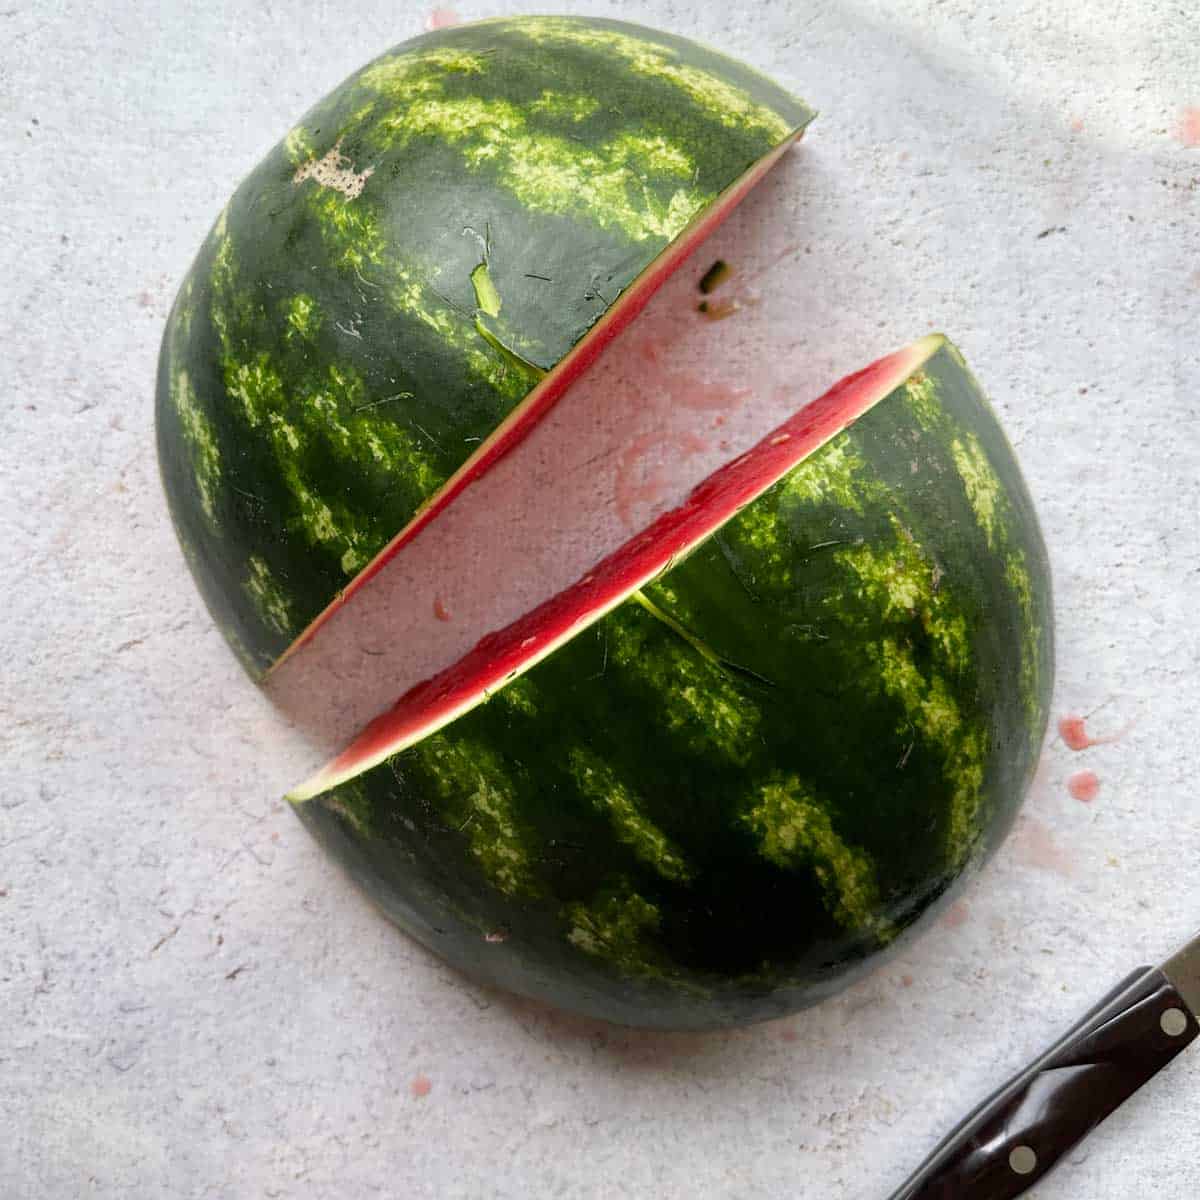 Watermelon once it is cut into fourths